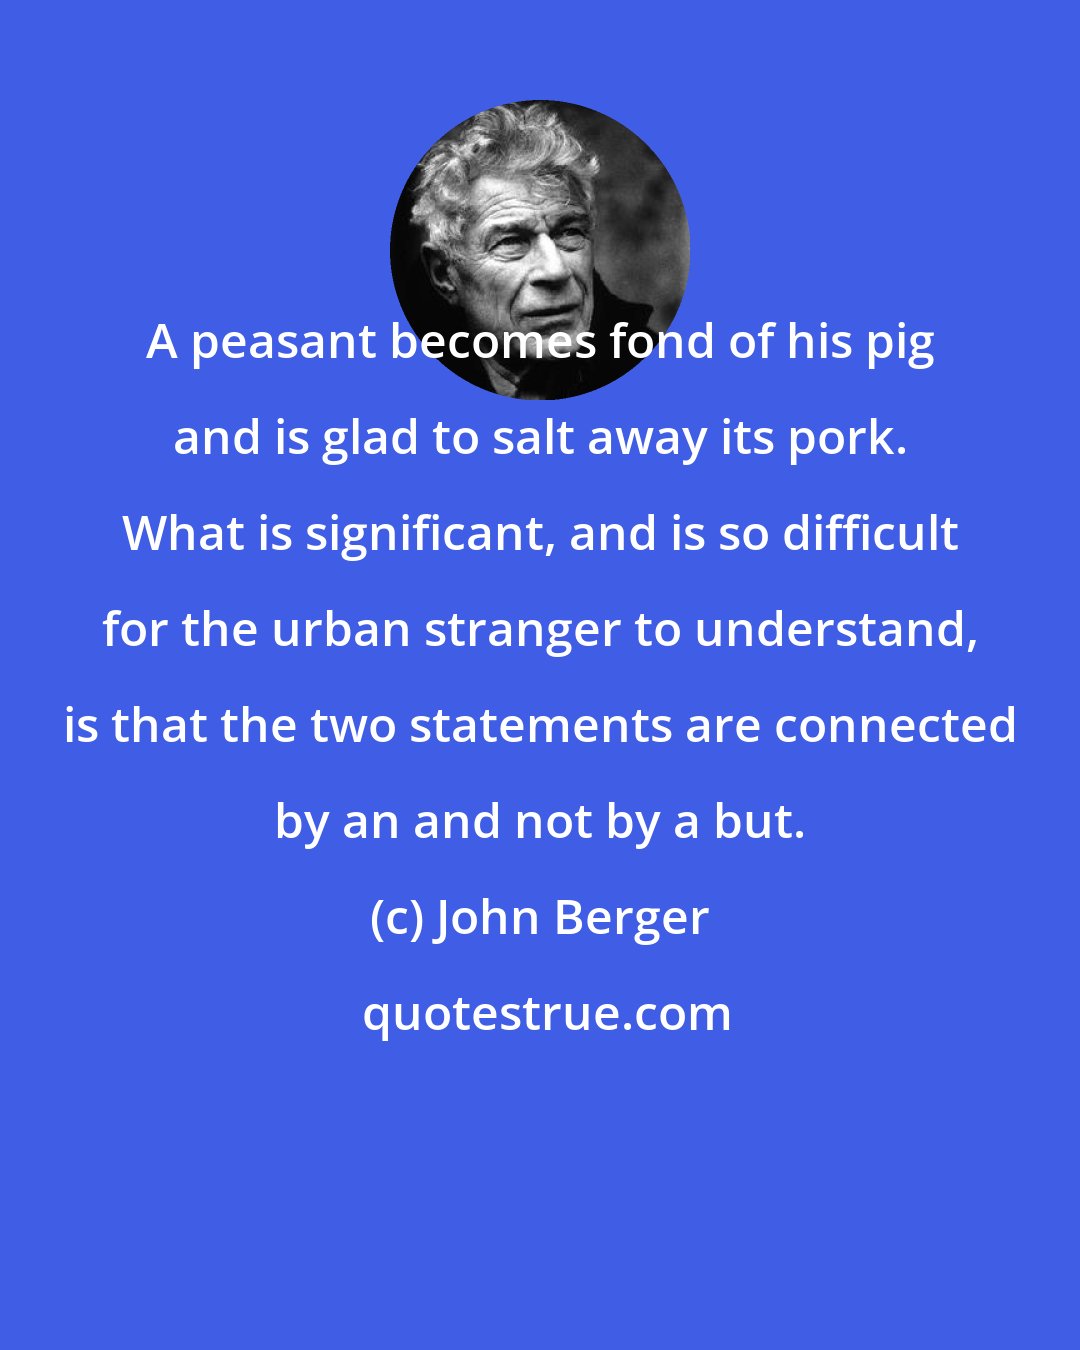 John Berger: A peasant becomes fond of his pig and is glad to salt away its pork. What is significant, and is so difficult for the urban stranger to understand, is that the two statements are connected by an and not by a but.